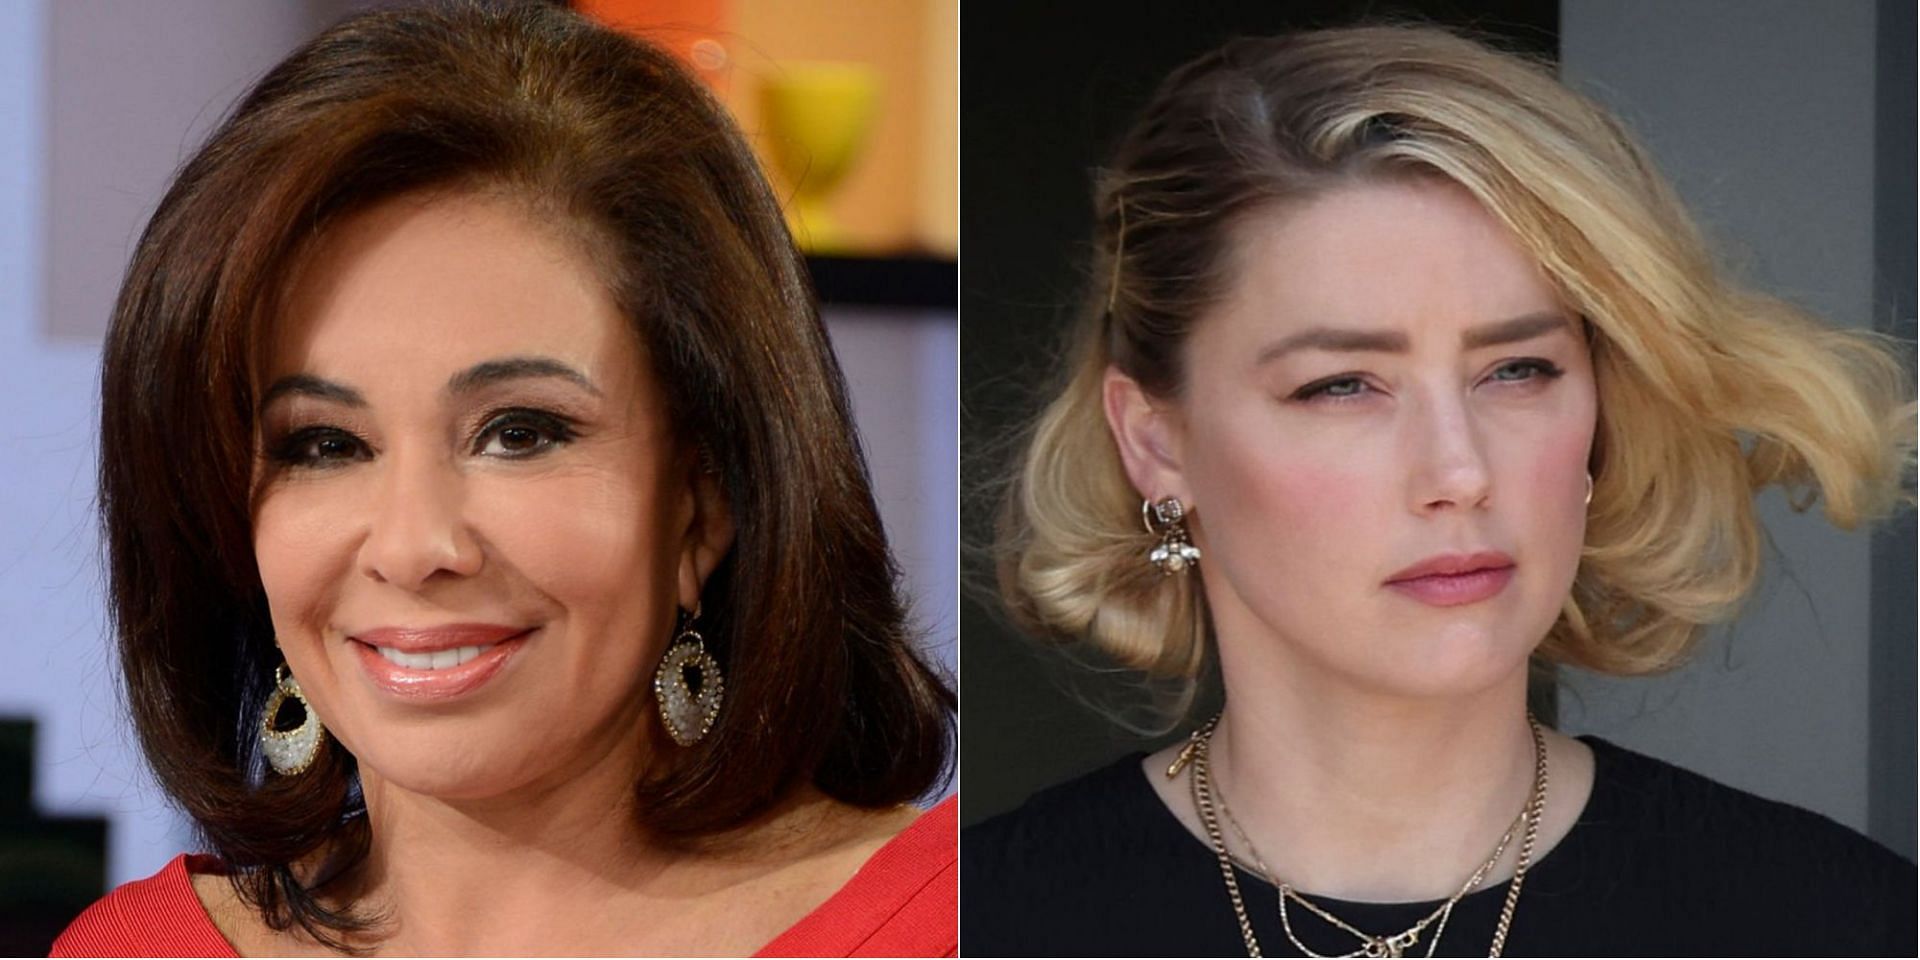 Judge Jeanine Pirro called out Amber Heard for calling herself a victim of abuse (Image via Getty Images)